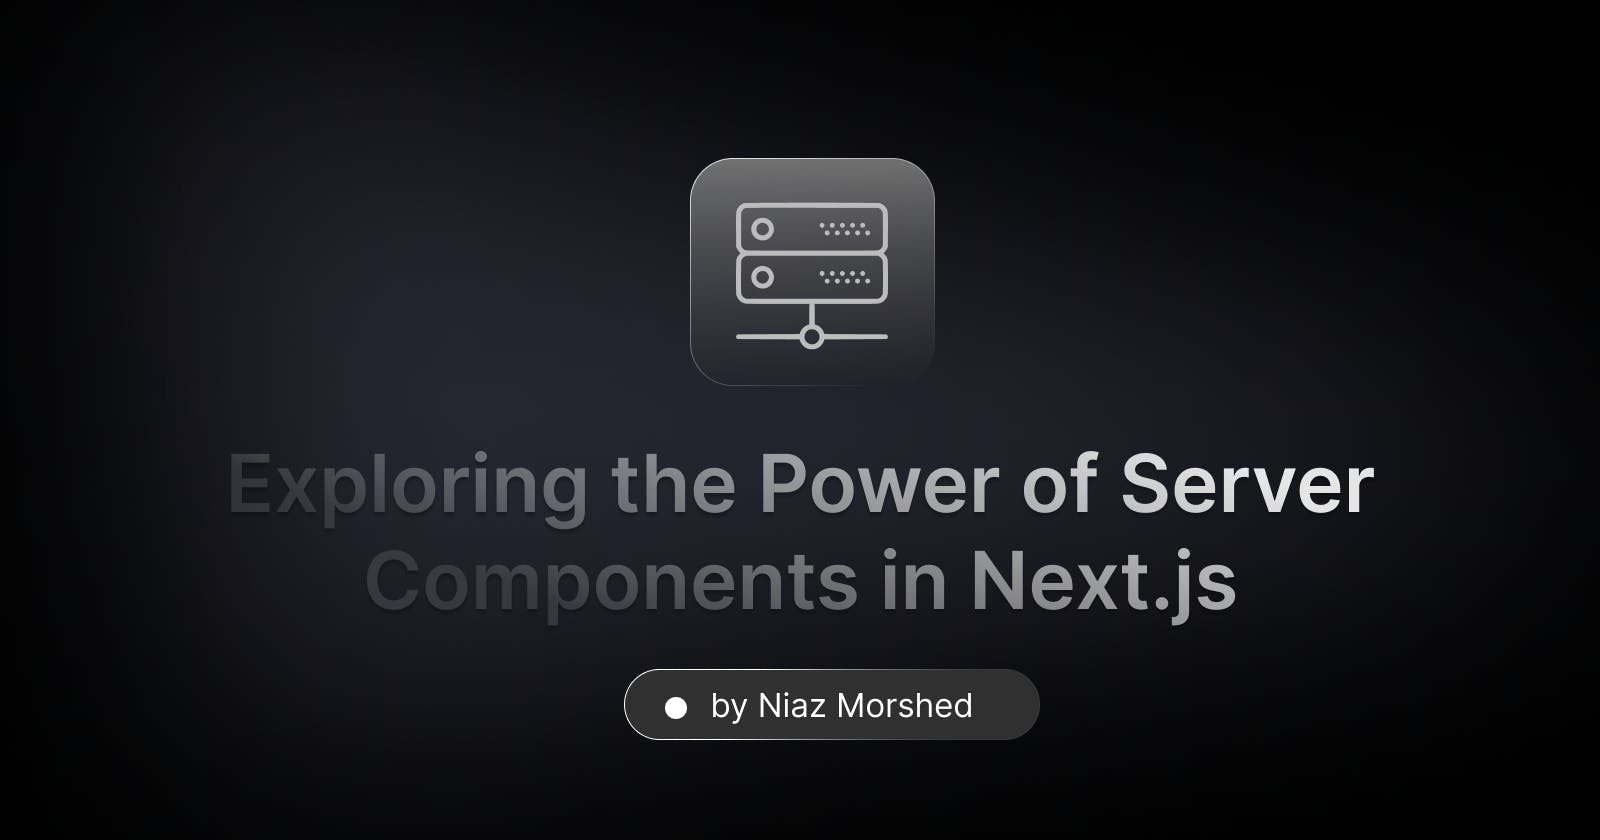 Exploring the Power of Server Components in Next.js